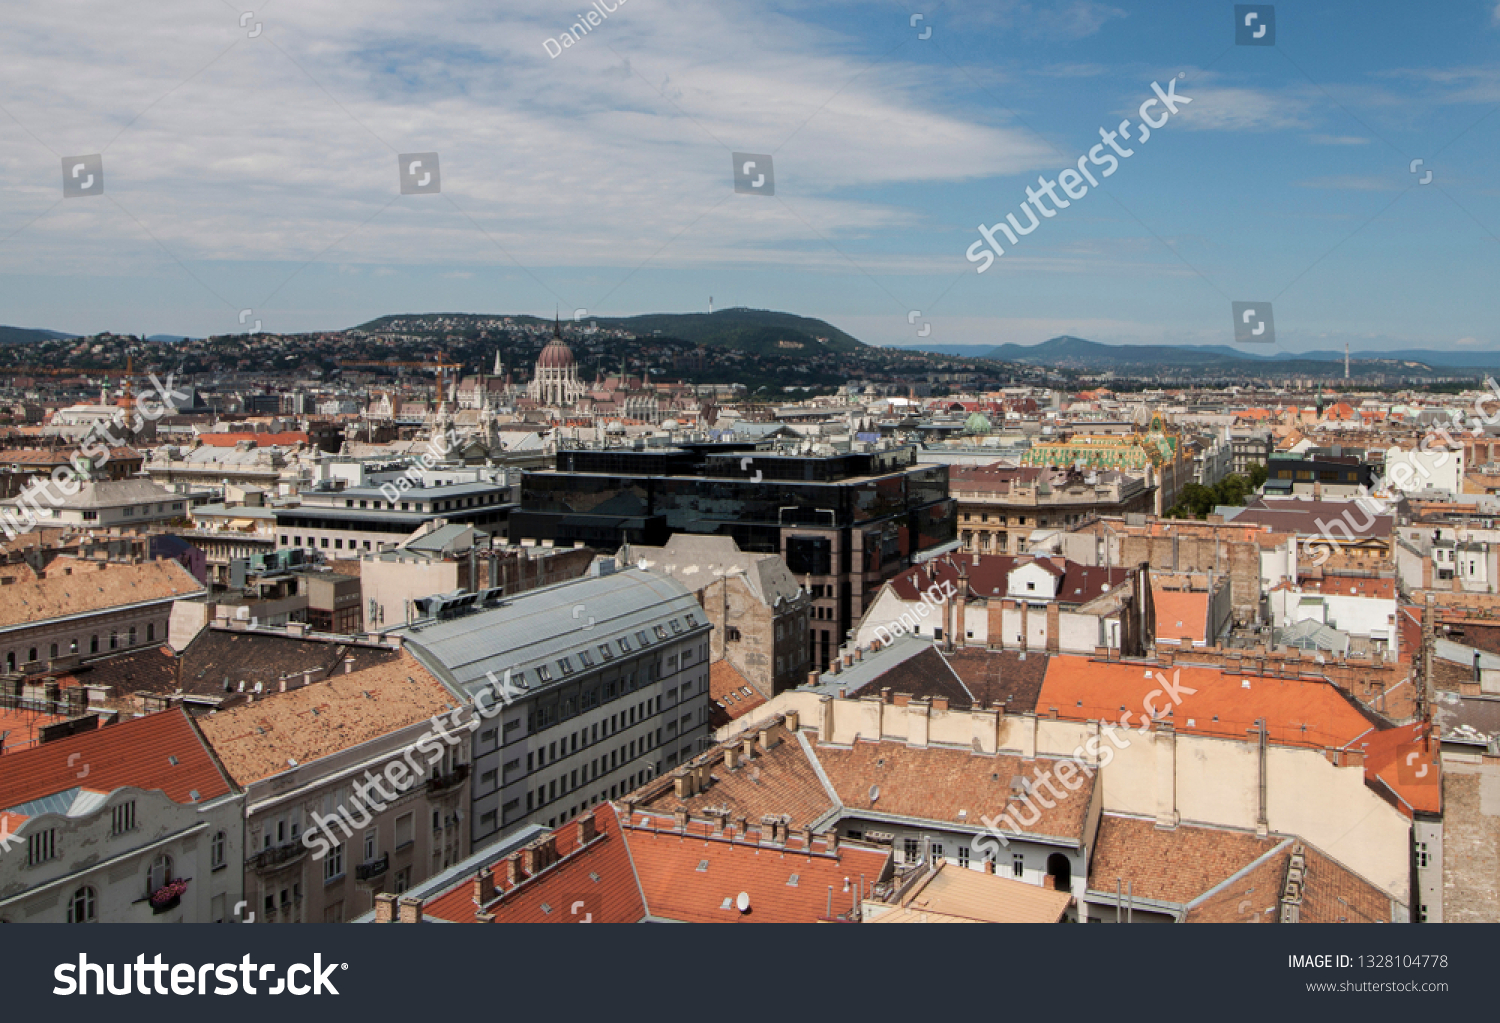 The Hungarian Parliament Building, rooftop view from the tower of St. Stephen's Basilica. Skyline of Budapest, Hungary, Europe. Buildings, towers and colorful rooftops. European capital city skyline. #1328104778